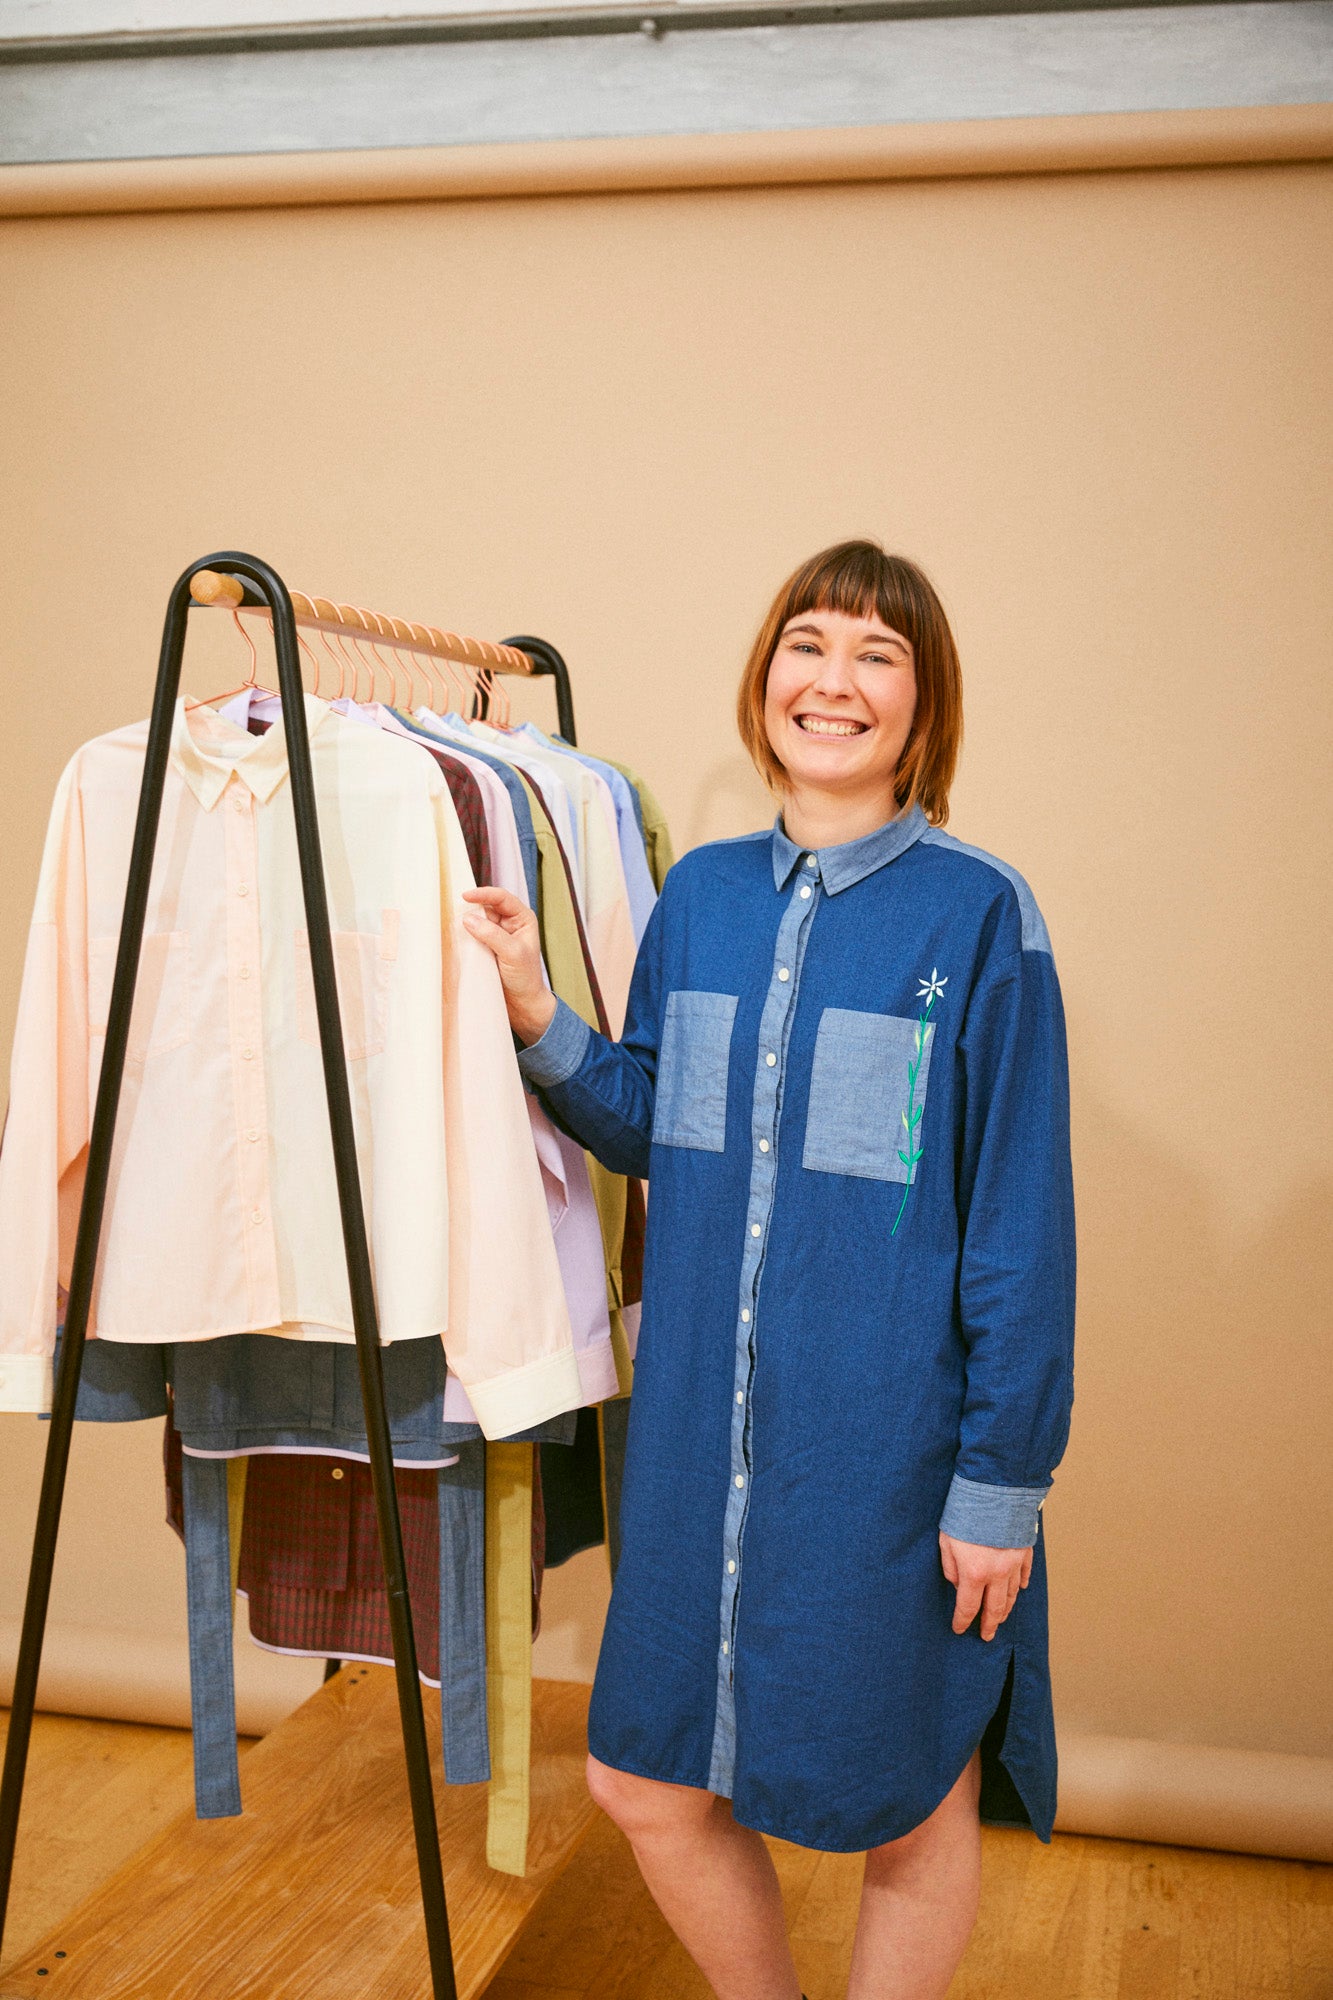 Saywood founder, Harriet, standing next to a rail of Saywood timeless shirts